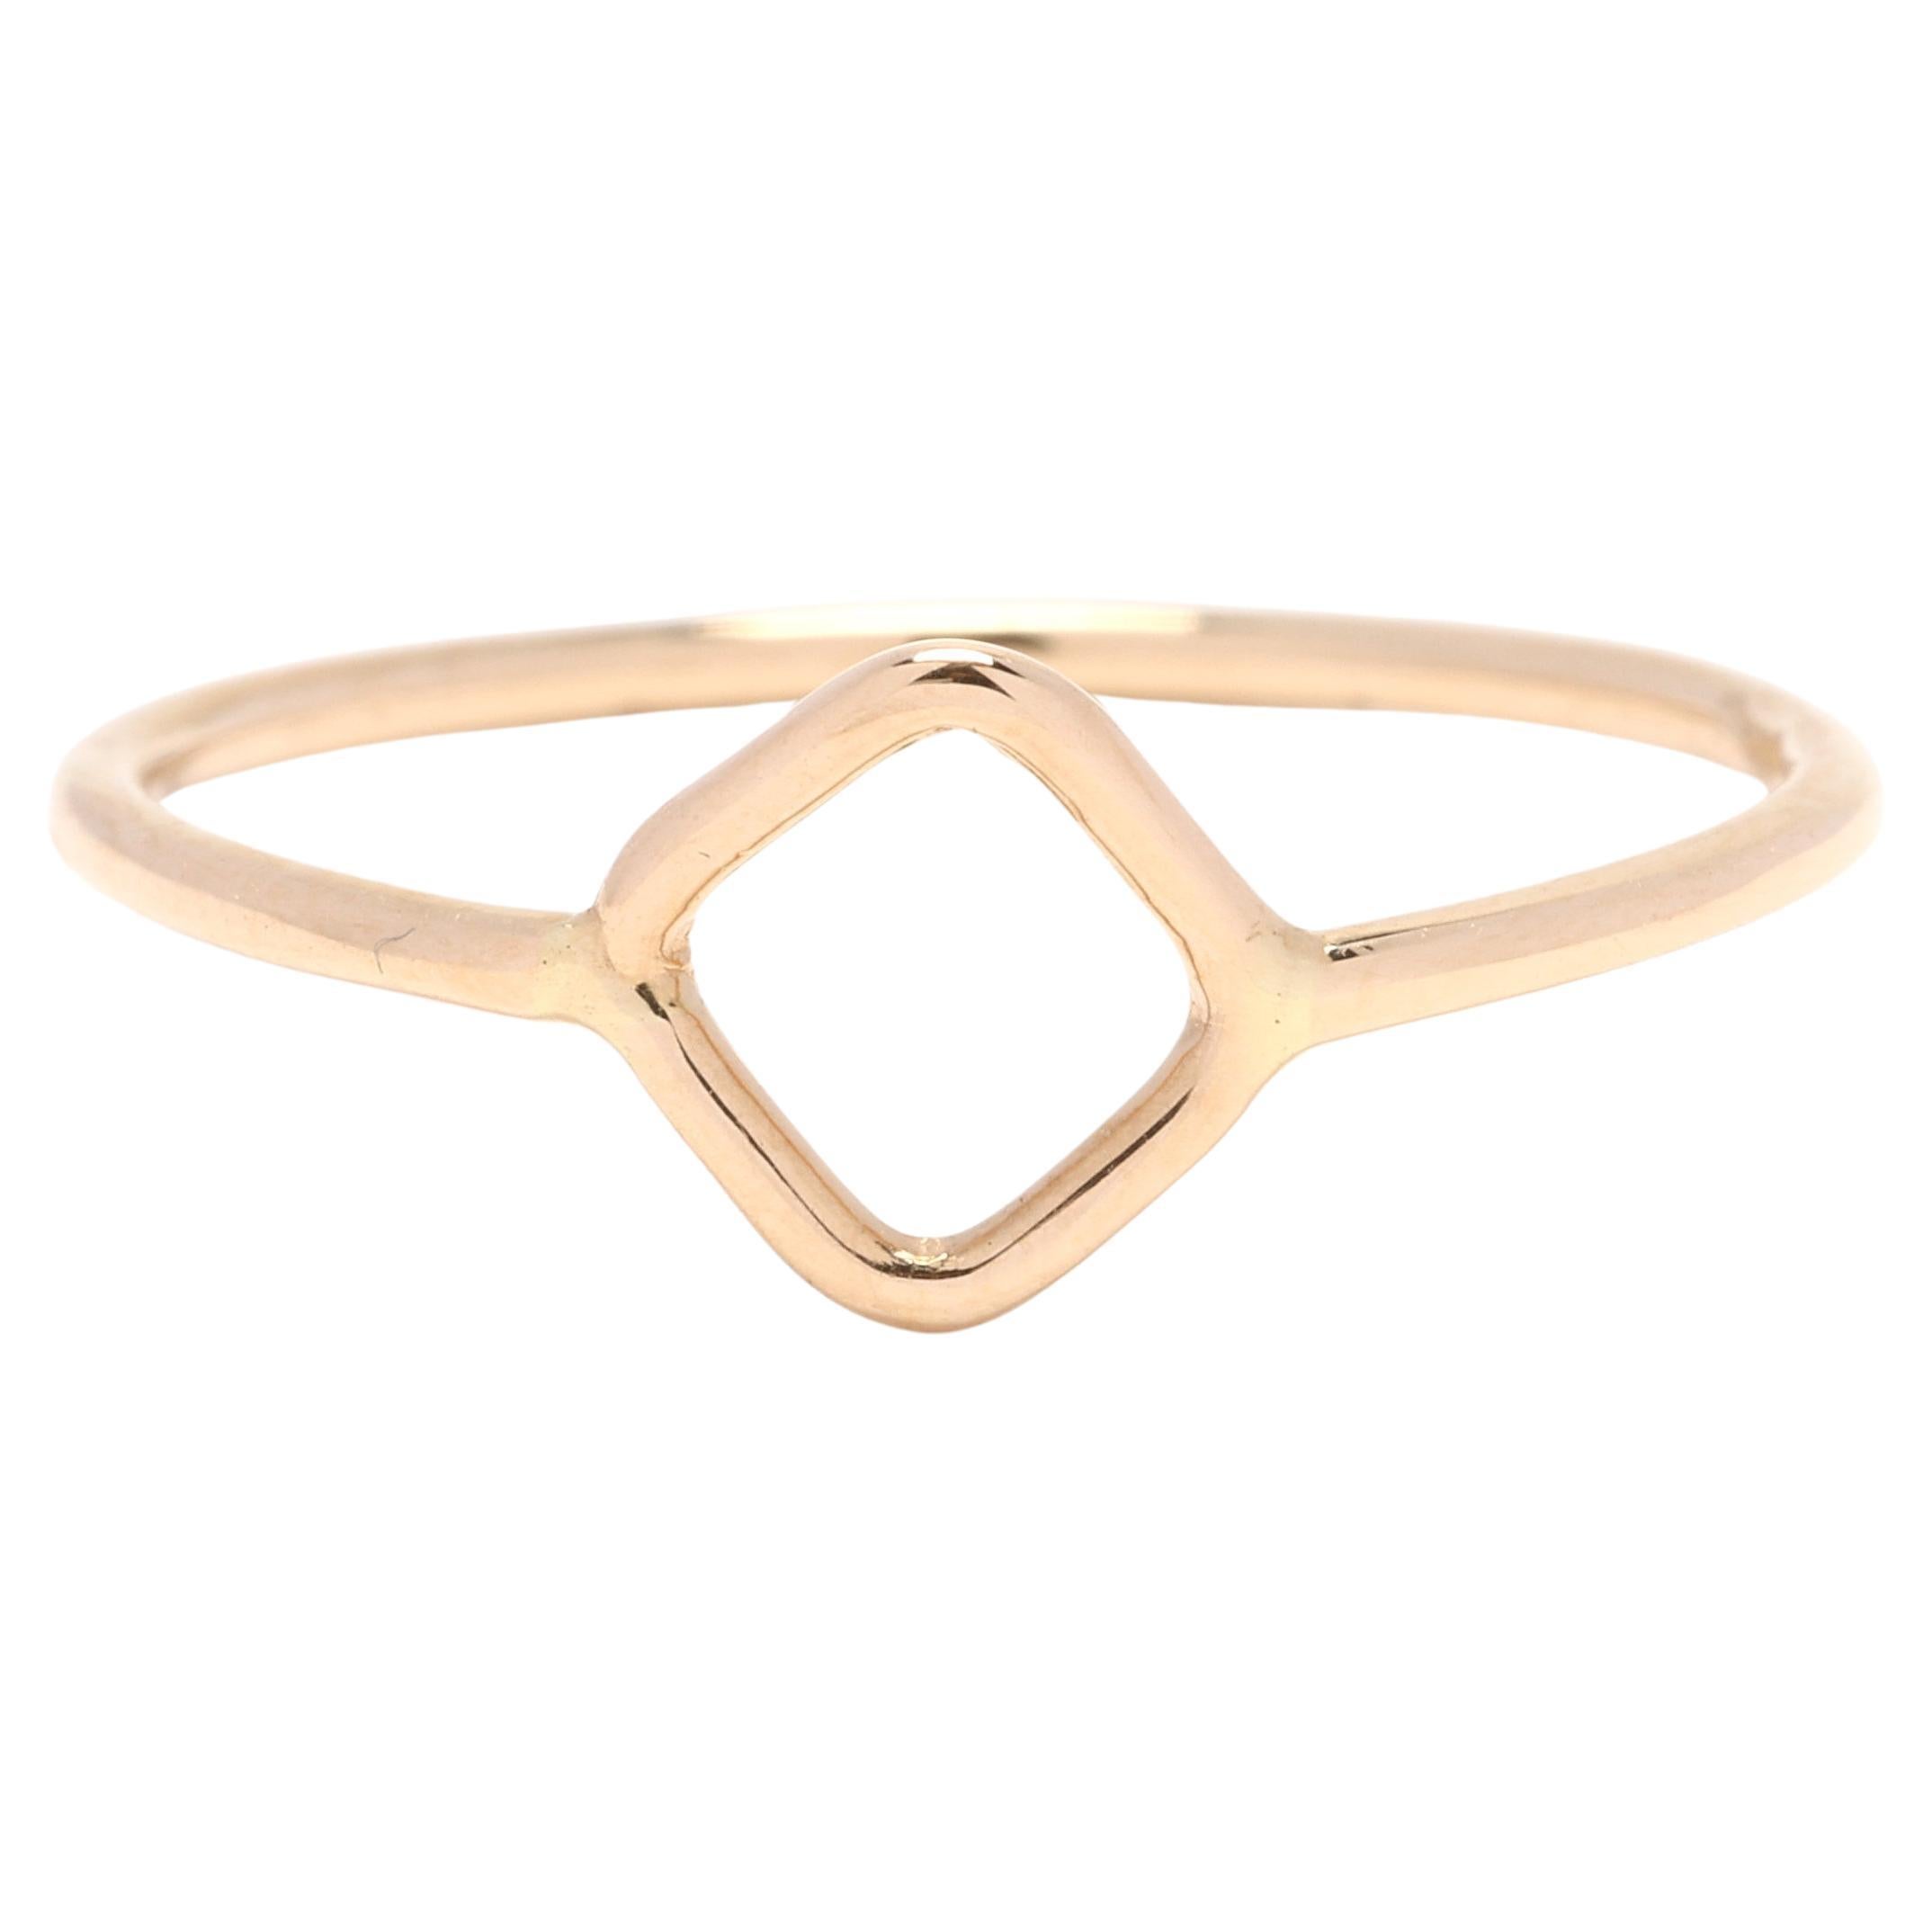 14K Yellow Gold Open Square Ring, Ring Size 6, Dainty Ring, Everyday Wear